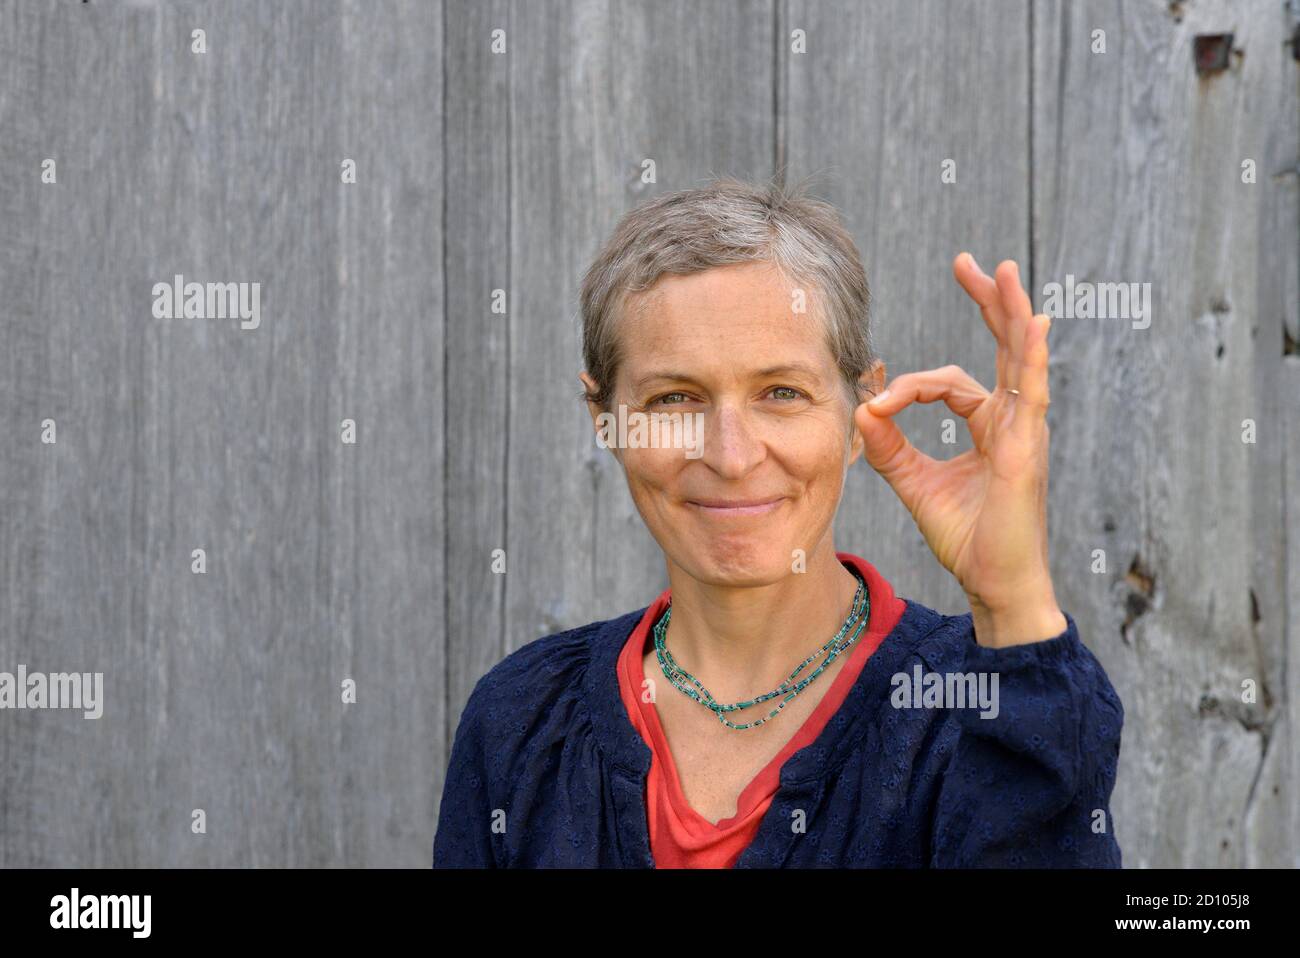 Optimistic modern middle-aged Caucasian country woman shows the ok sign (approval gesture) with her left hand, in front of old barn wood background. Stock Photo